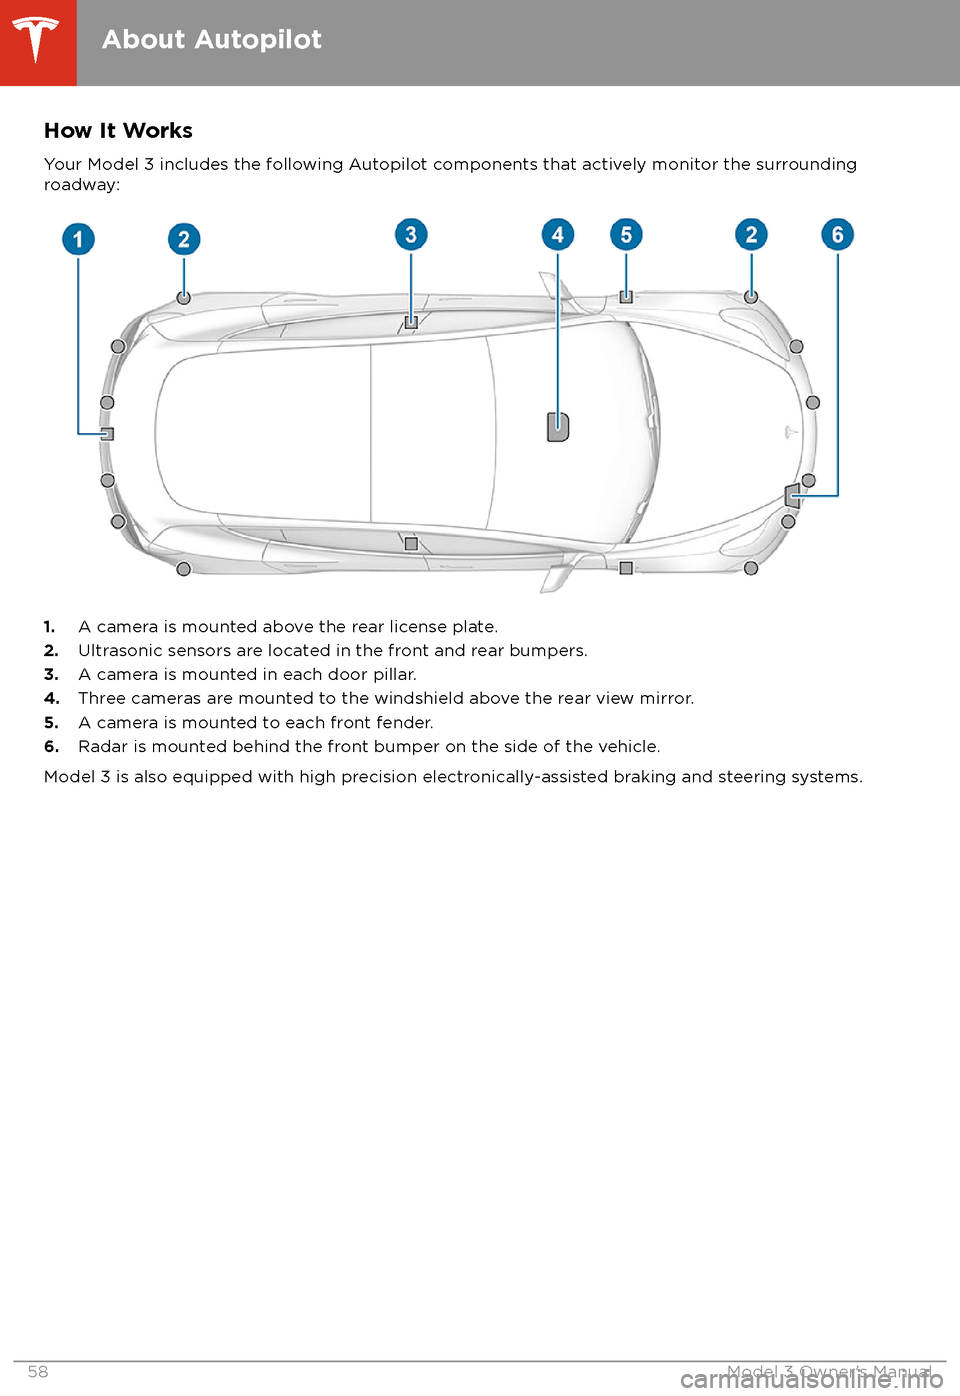 TESLA MODEL 3 2018 Workshop Manual How It WorksYour Model 3 includes the following Autopilot components that actively monitor the surrounding
roadway:
1. A camera is mounted above the rear license plate.
2. Ultrasonic sensors are locat